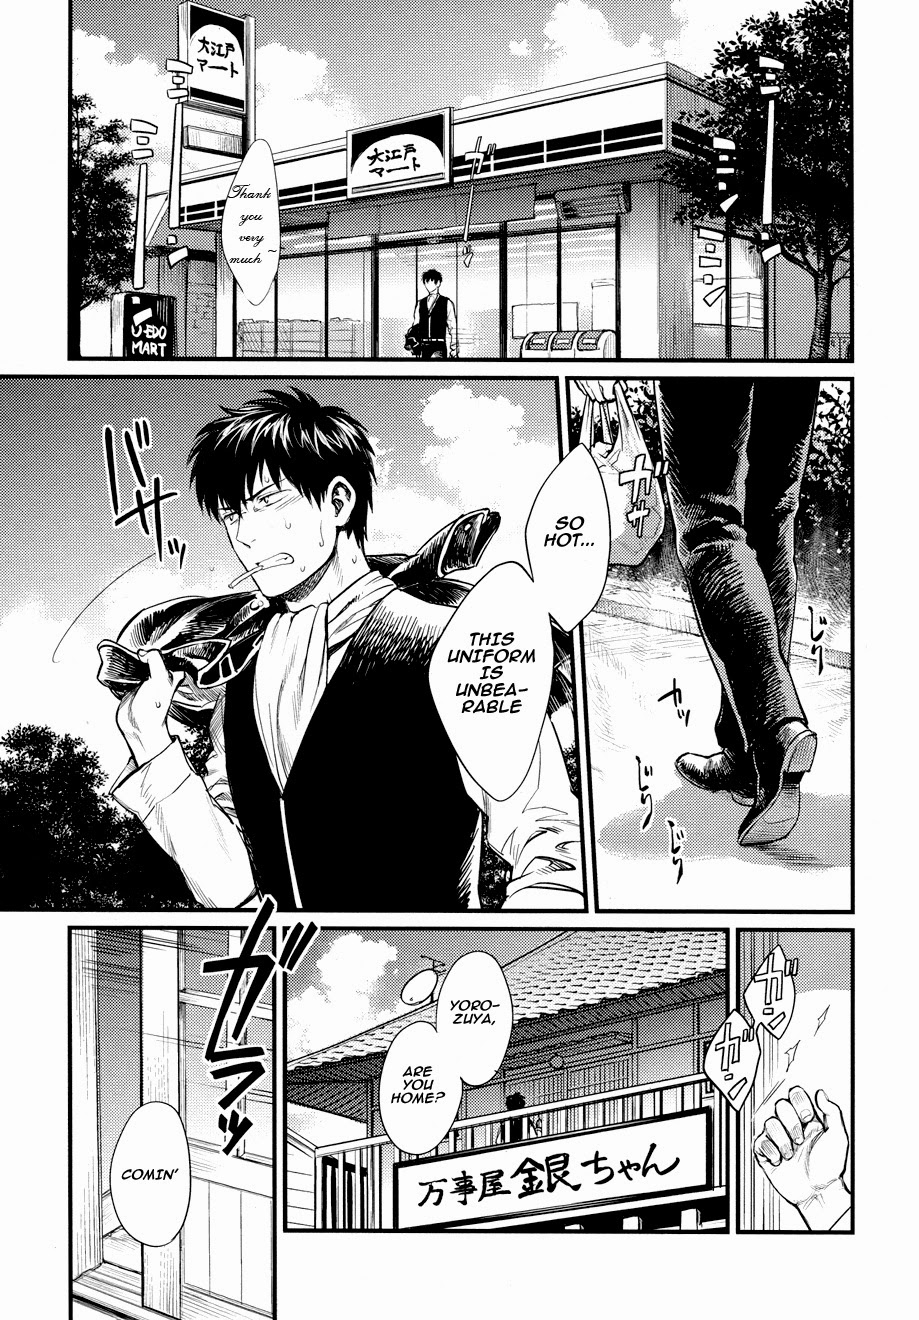 [3745HOUSE (Mikami Takeru)] Dance on a SultryDay (Gintama) [English] 1